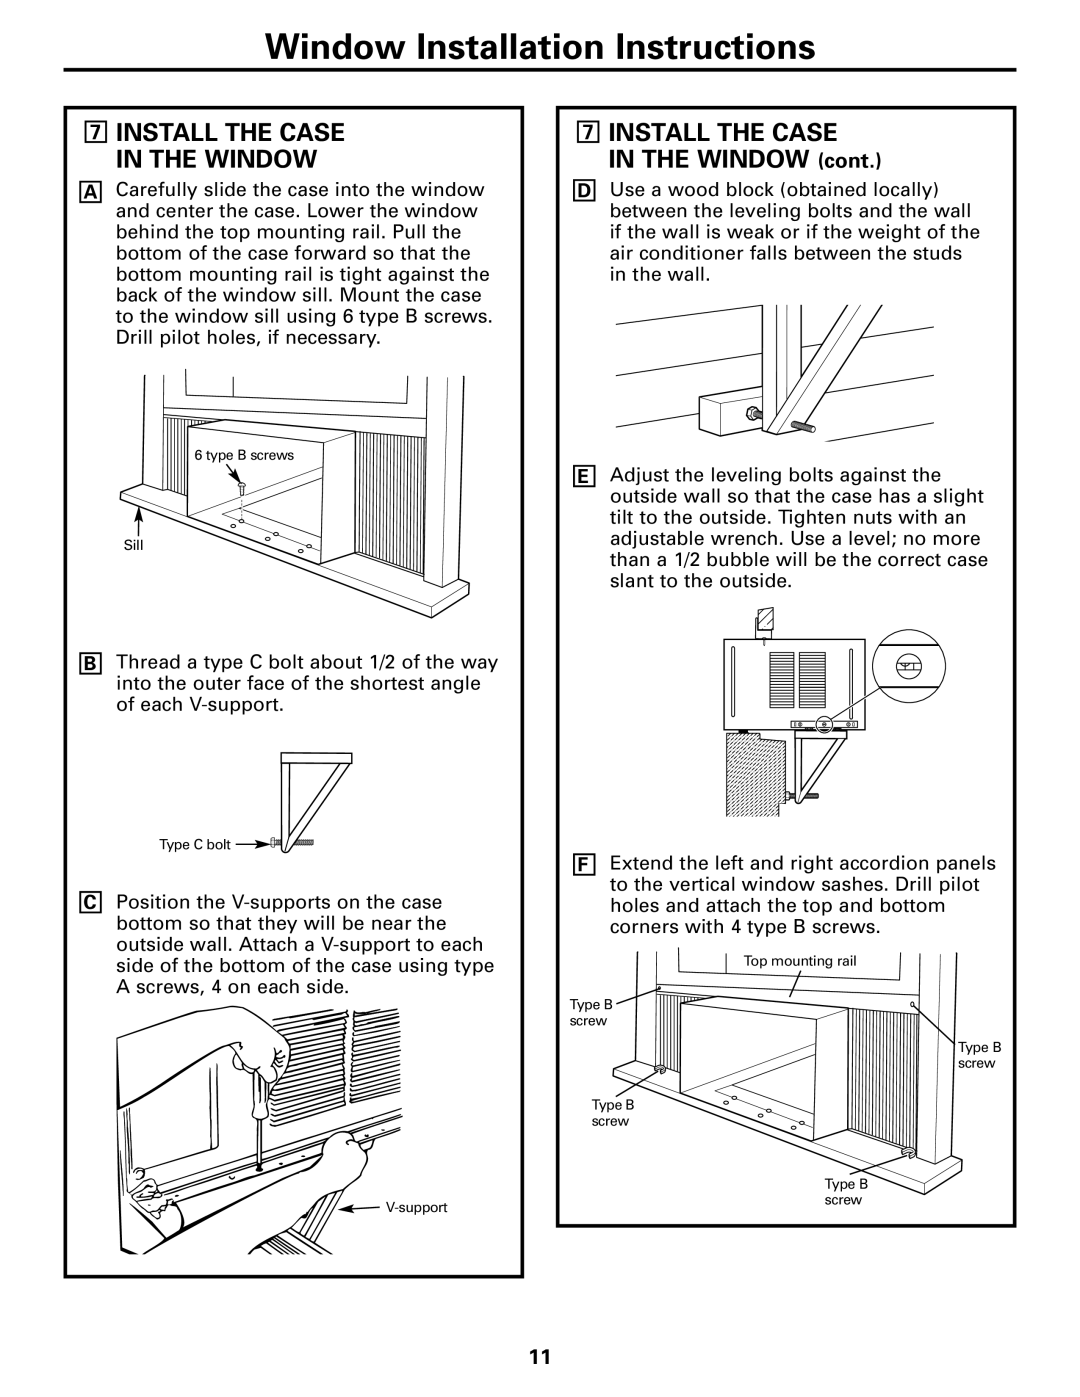 GE ASQ28 owner manual 7INSTALL THE CASE IN THE WINDOW cont, Window Installation Instructions 